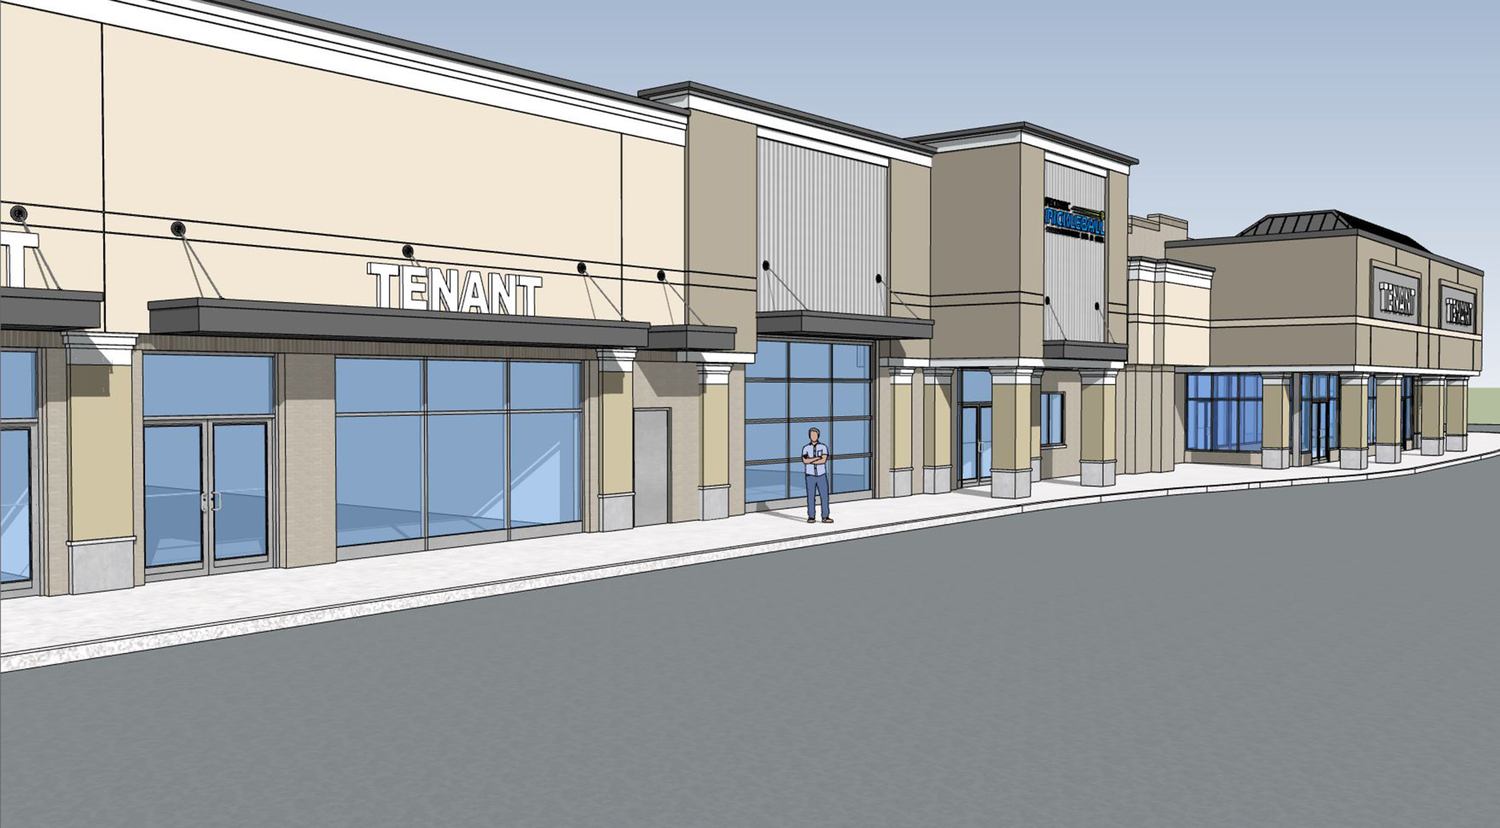 A rendering of what the renovated building that used to be K-Mart would look like.